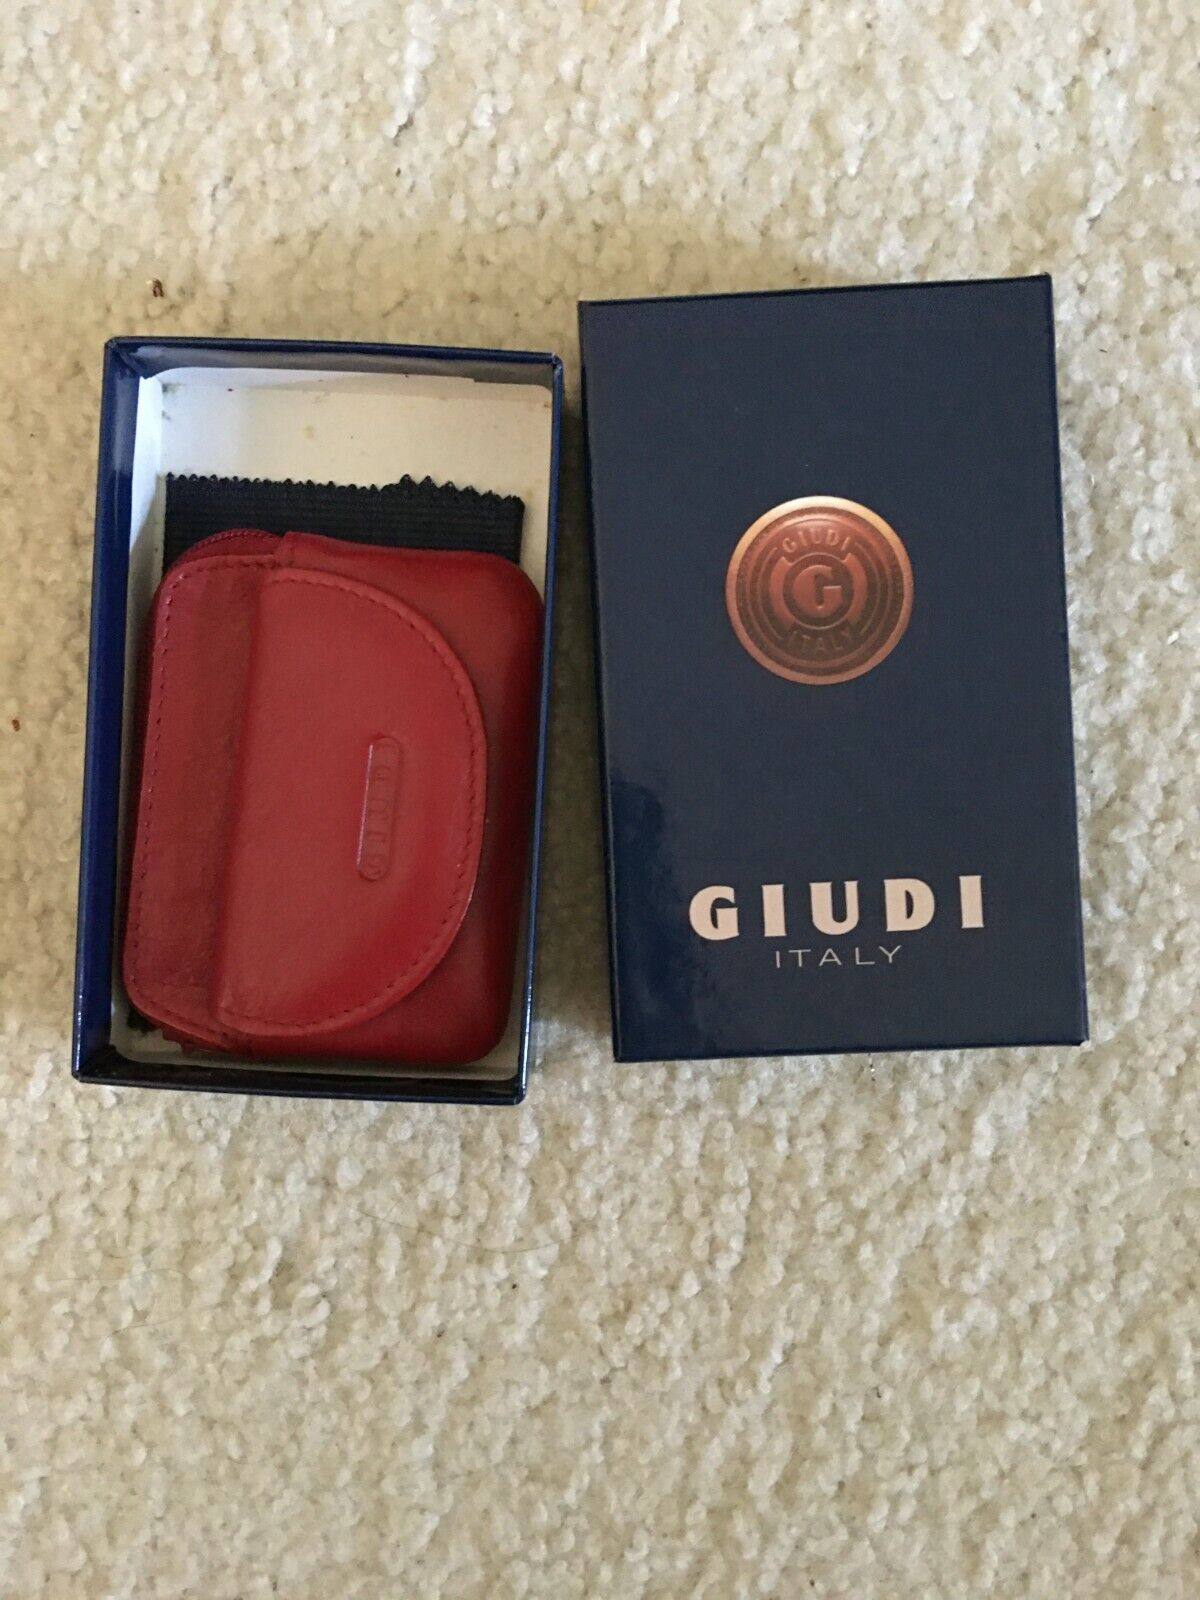 Giudi Italy Women\'s Red Leather Wallet / Coin bag / Key chain New In box